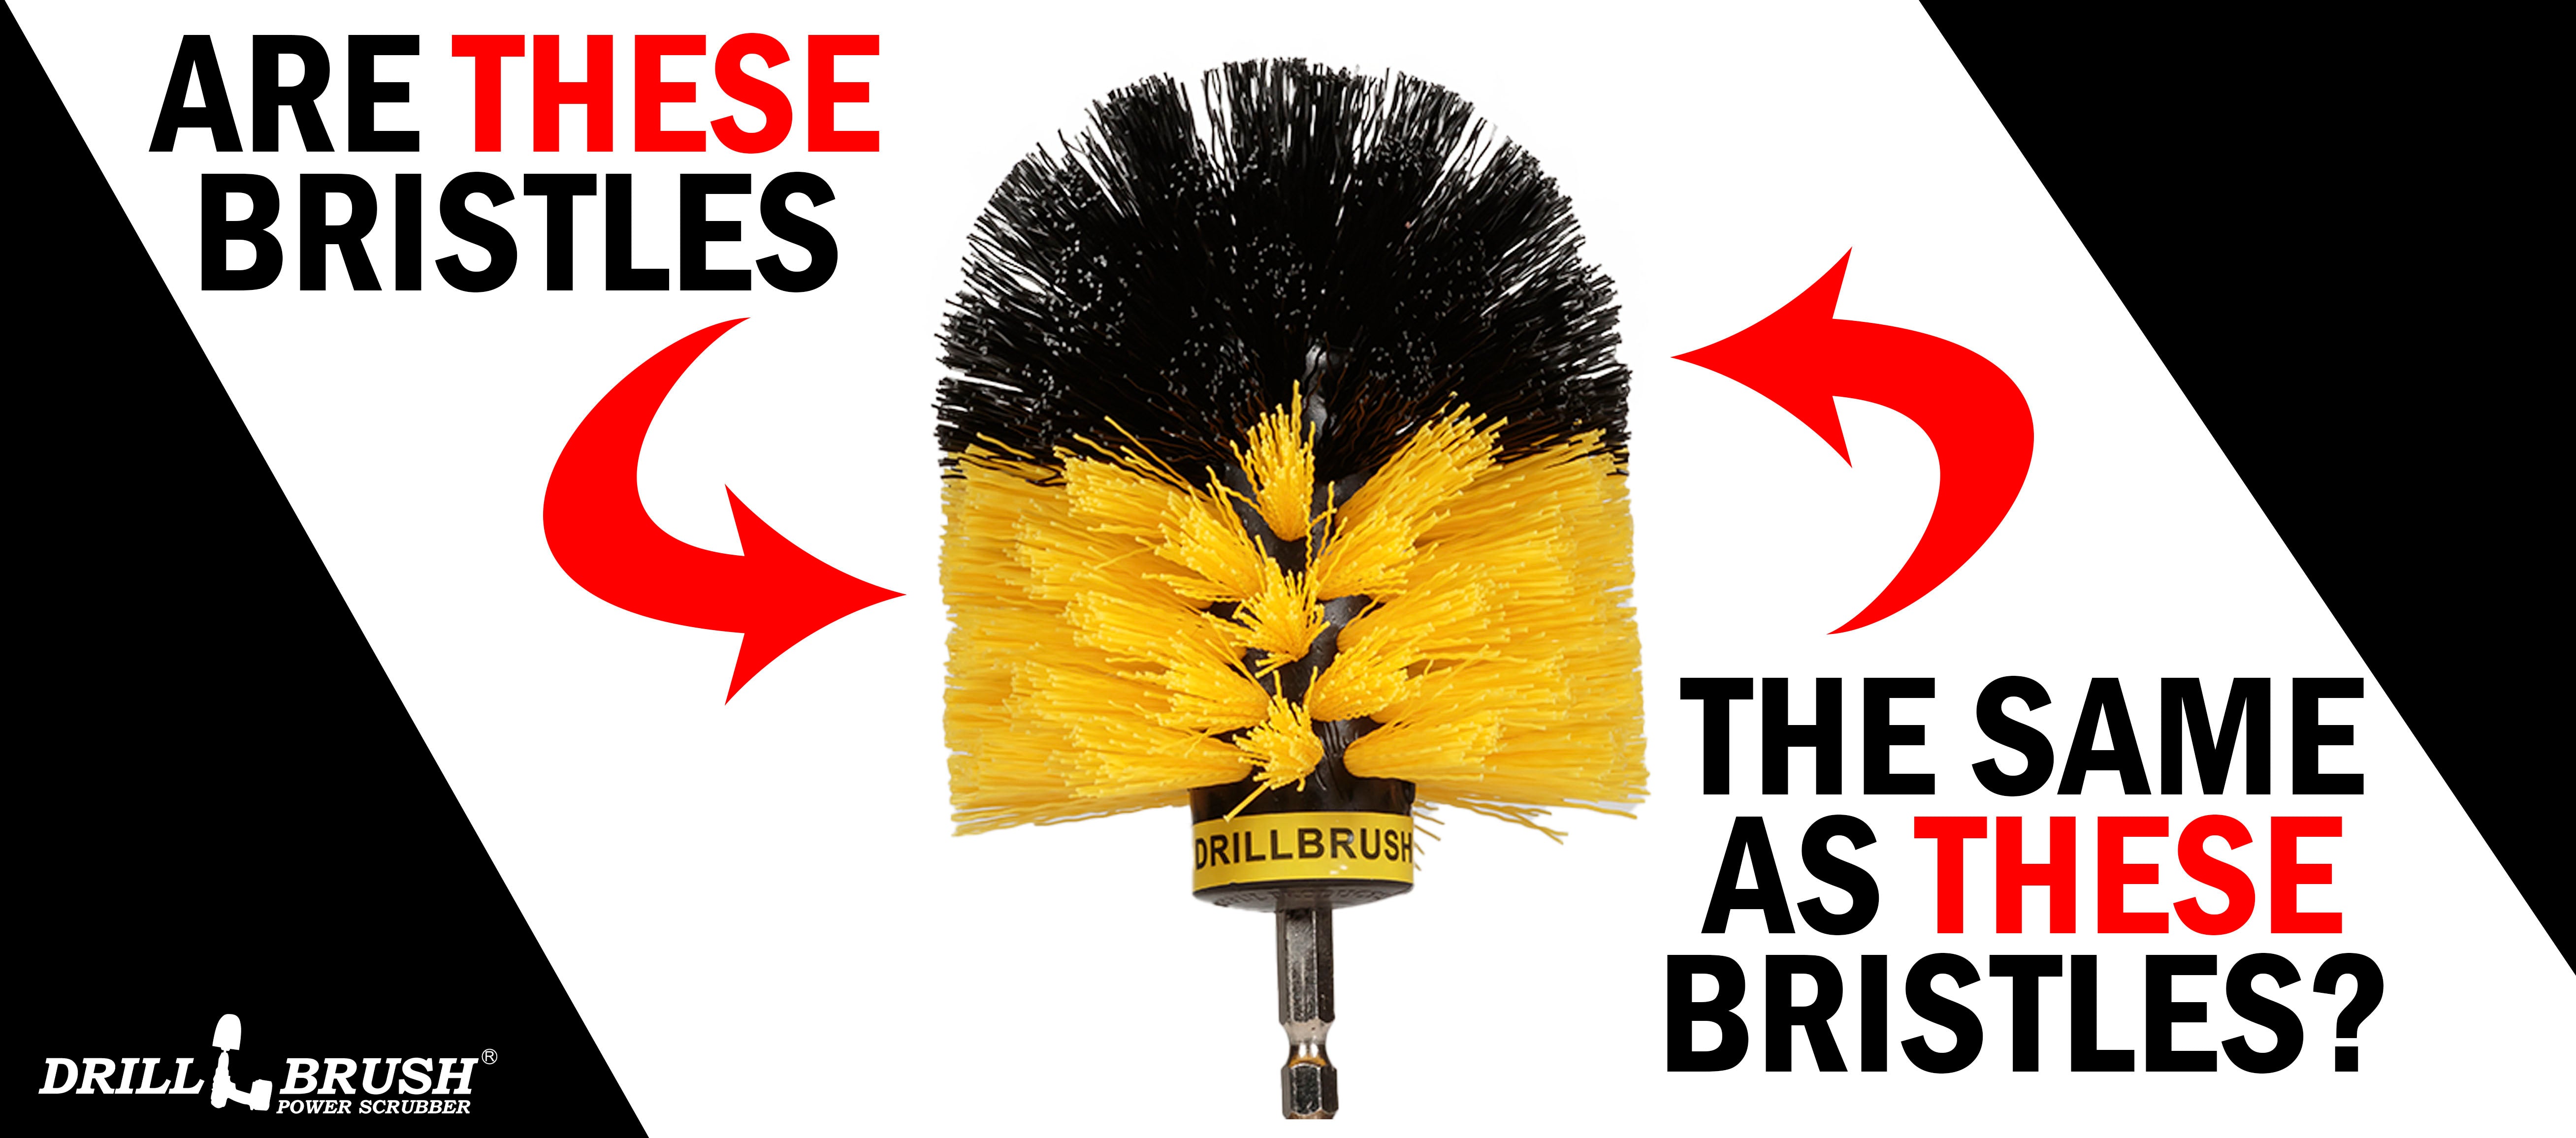 Is the Black Tip on Original Brushes Stiffer Than the Rest of the Brush?